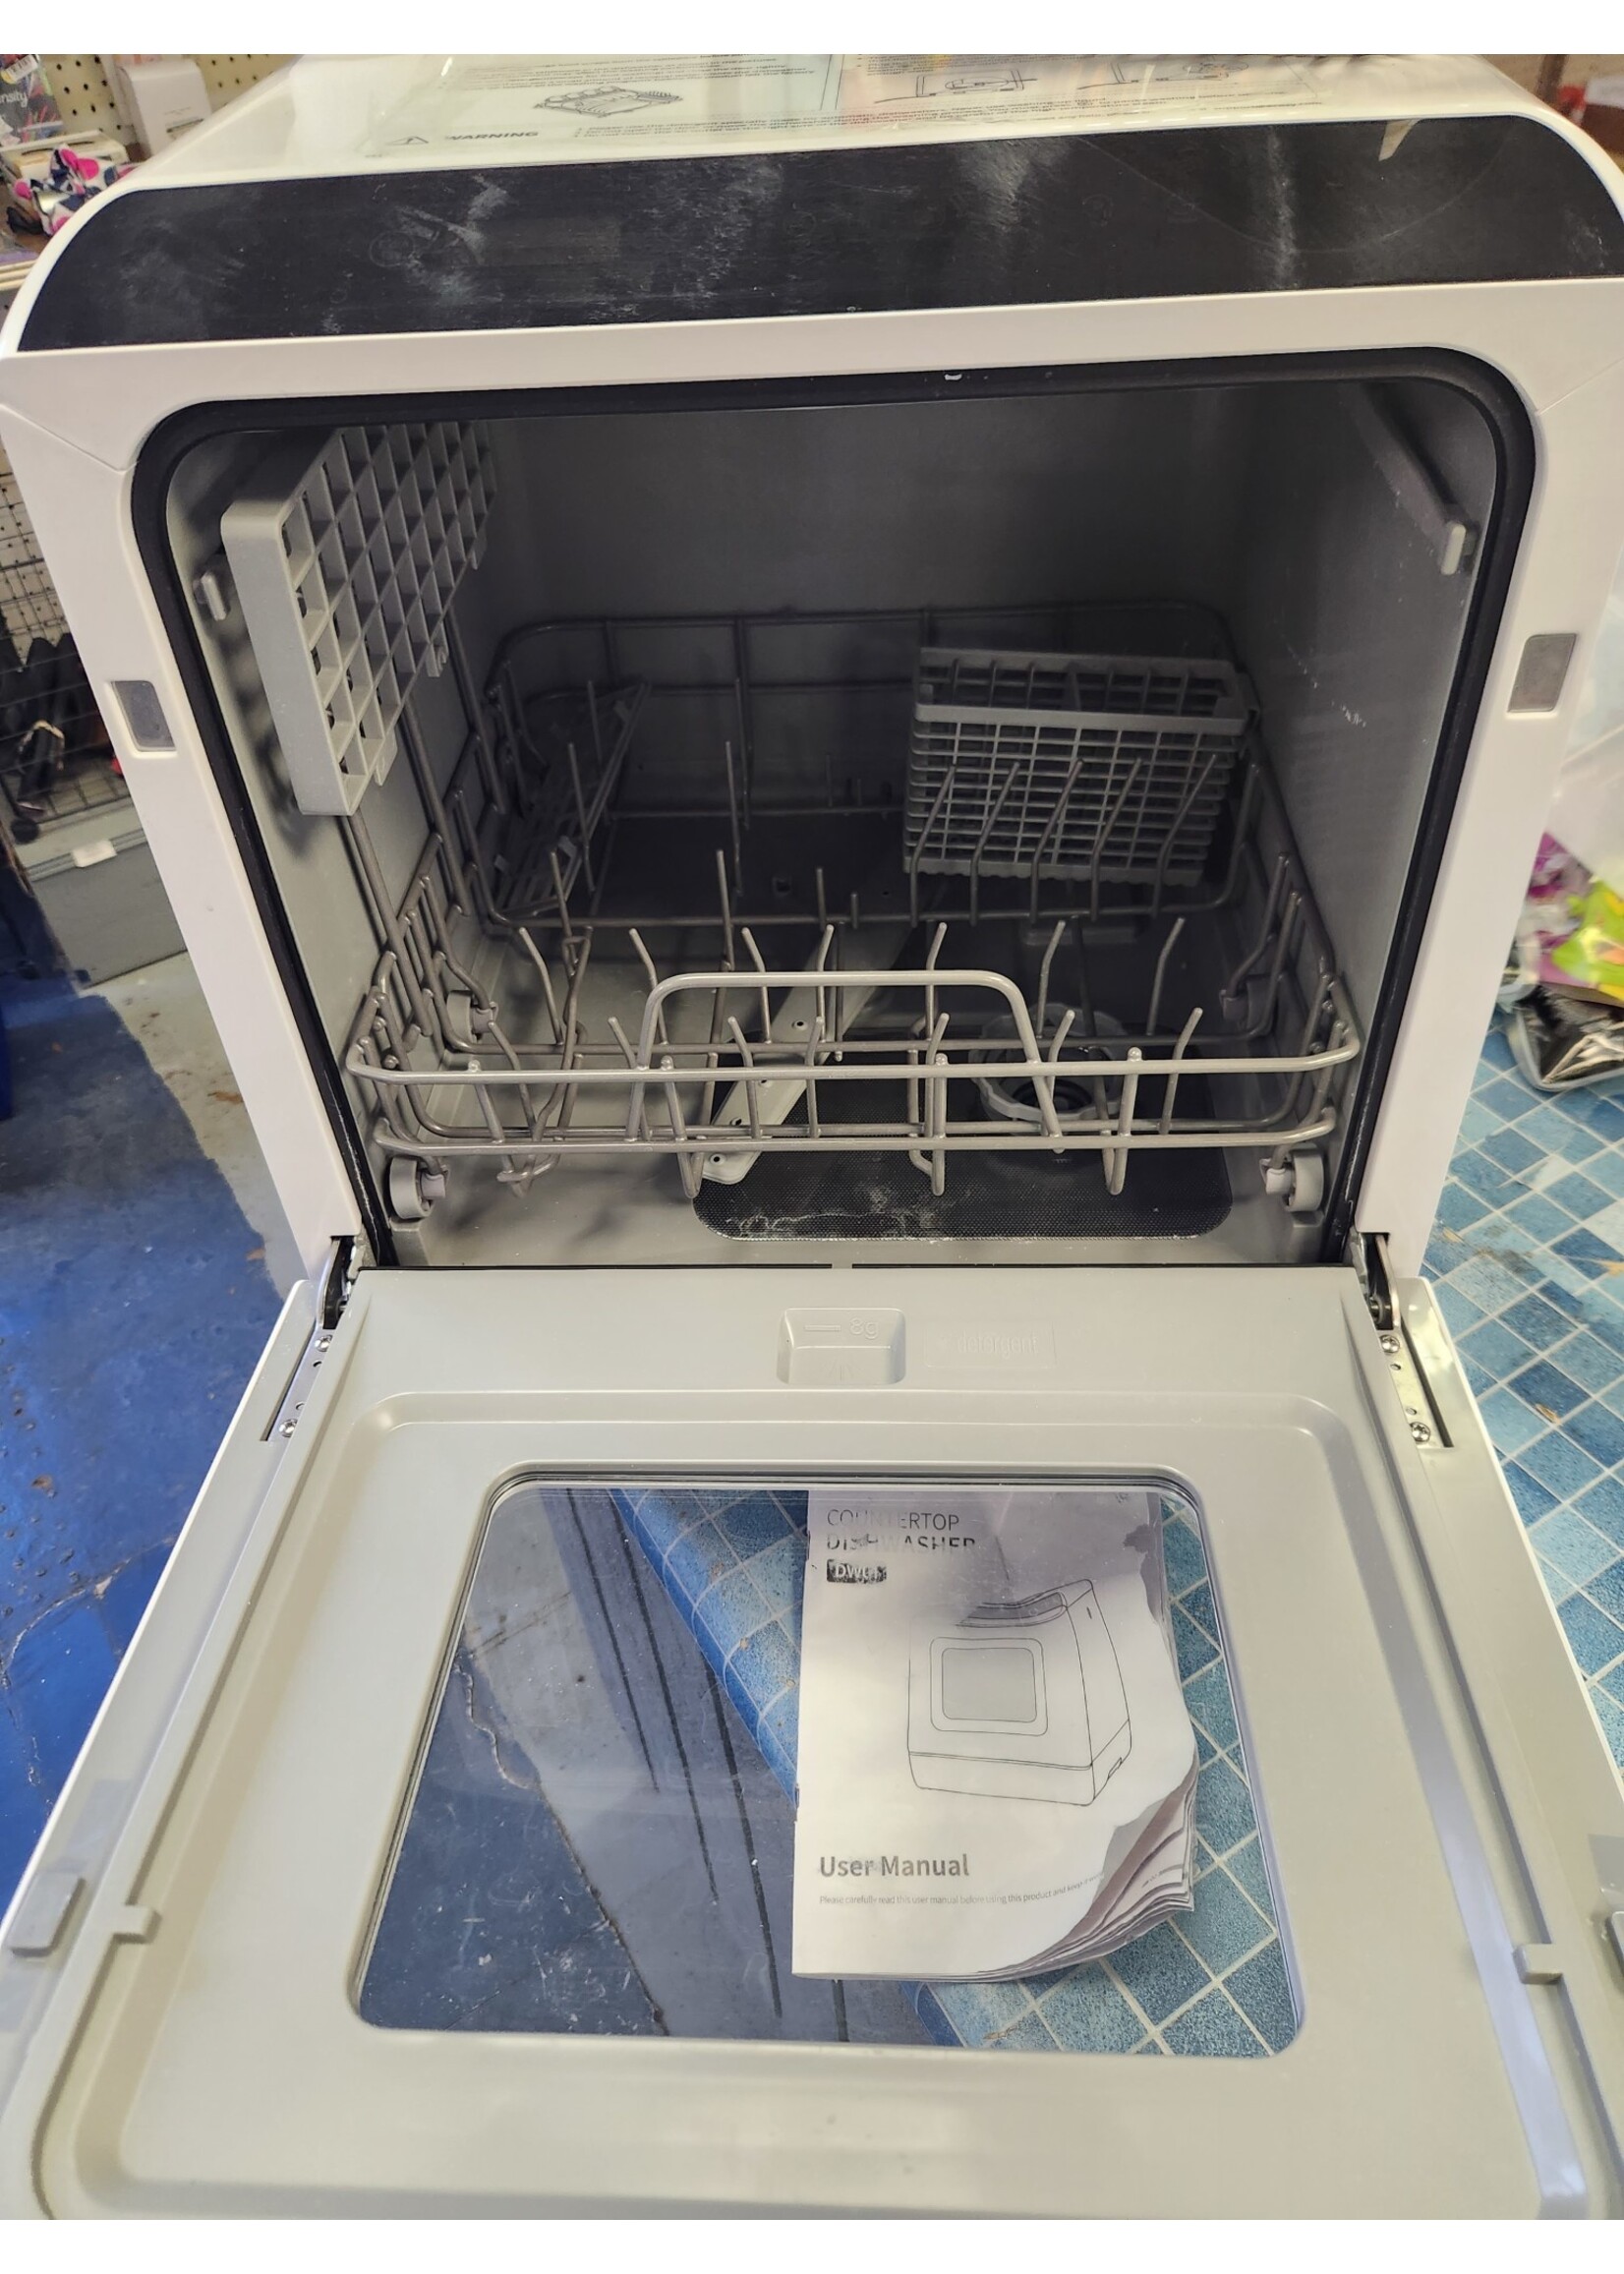 Countertop dishwasher (no water hookup required) - appliances - by